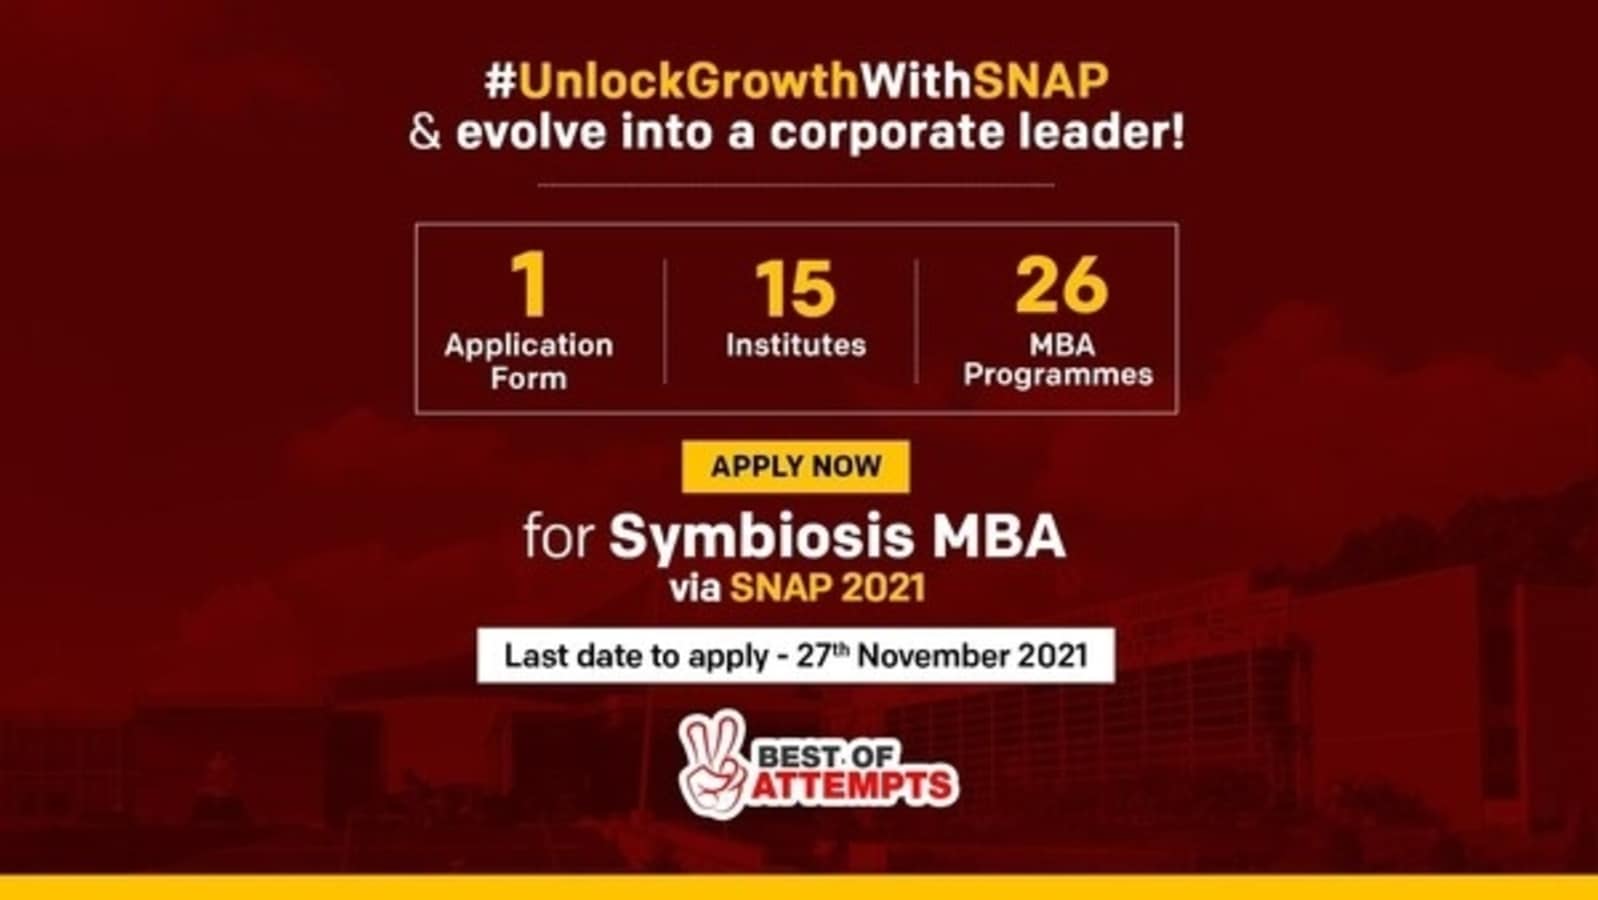 Symbiosis MBA admission Last few days left to apply for SNAP 2021